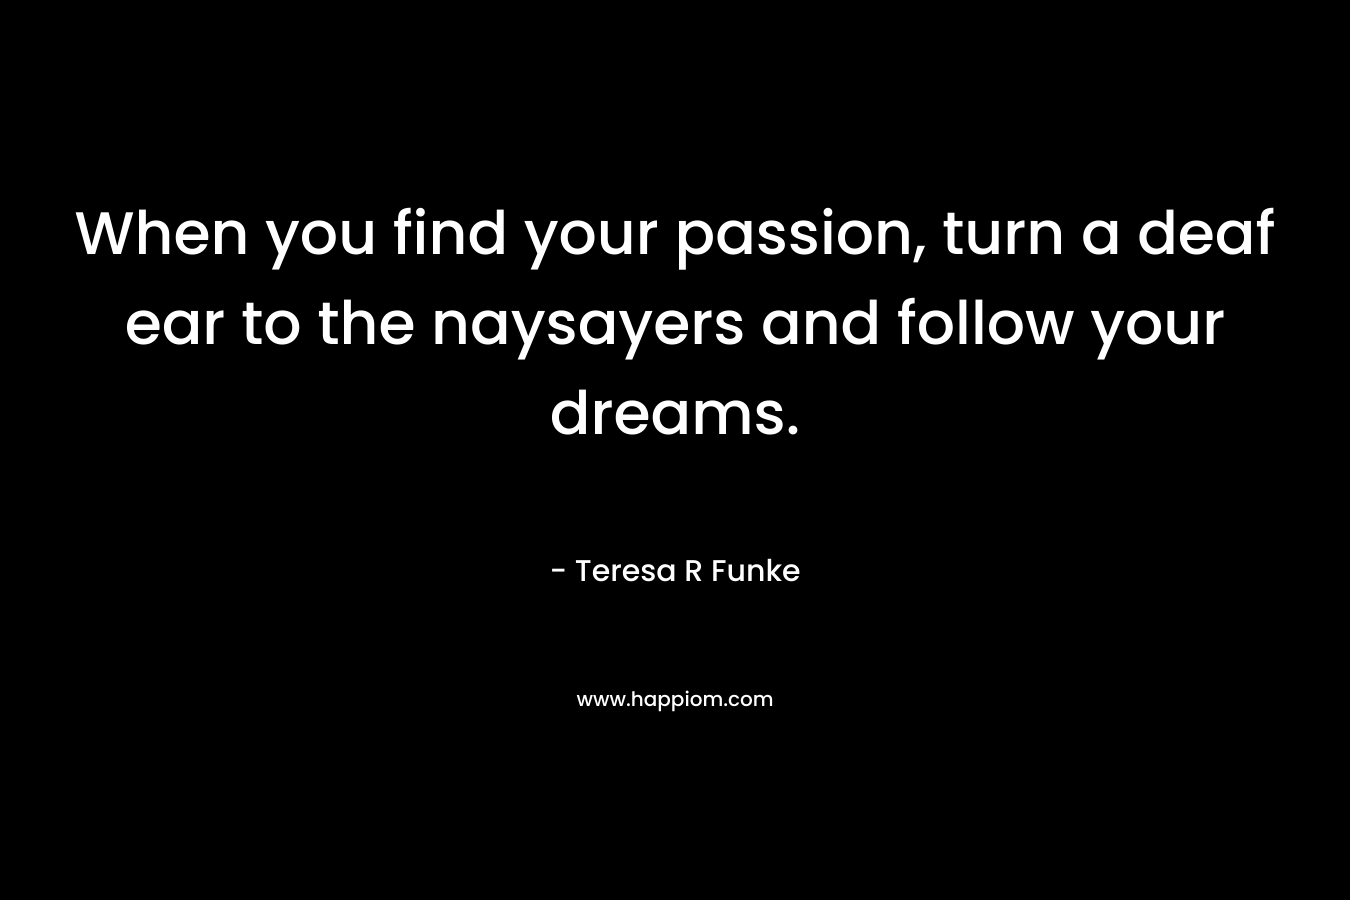 When you find your passion, turn a deaf ear to the naysayers and follow your dreams.